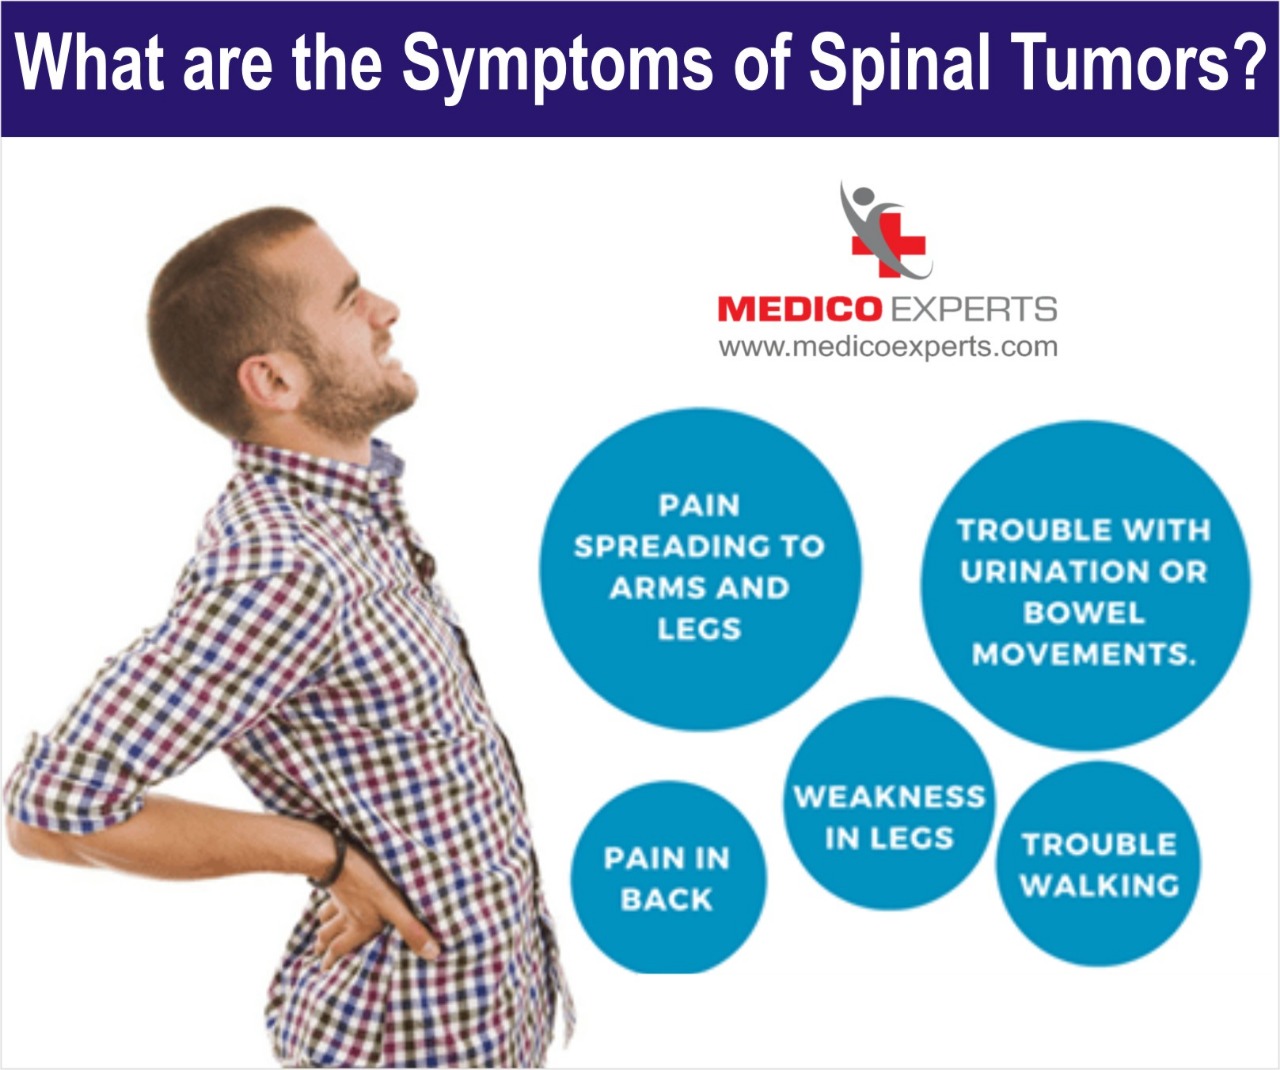 Advance Spine Tumor Treatment in India | Dedicated Spine Surgeon